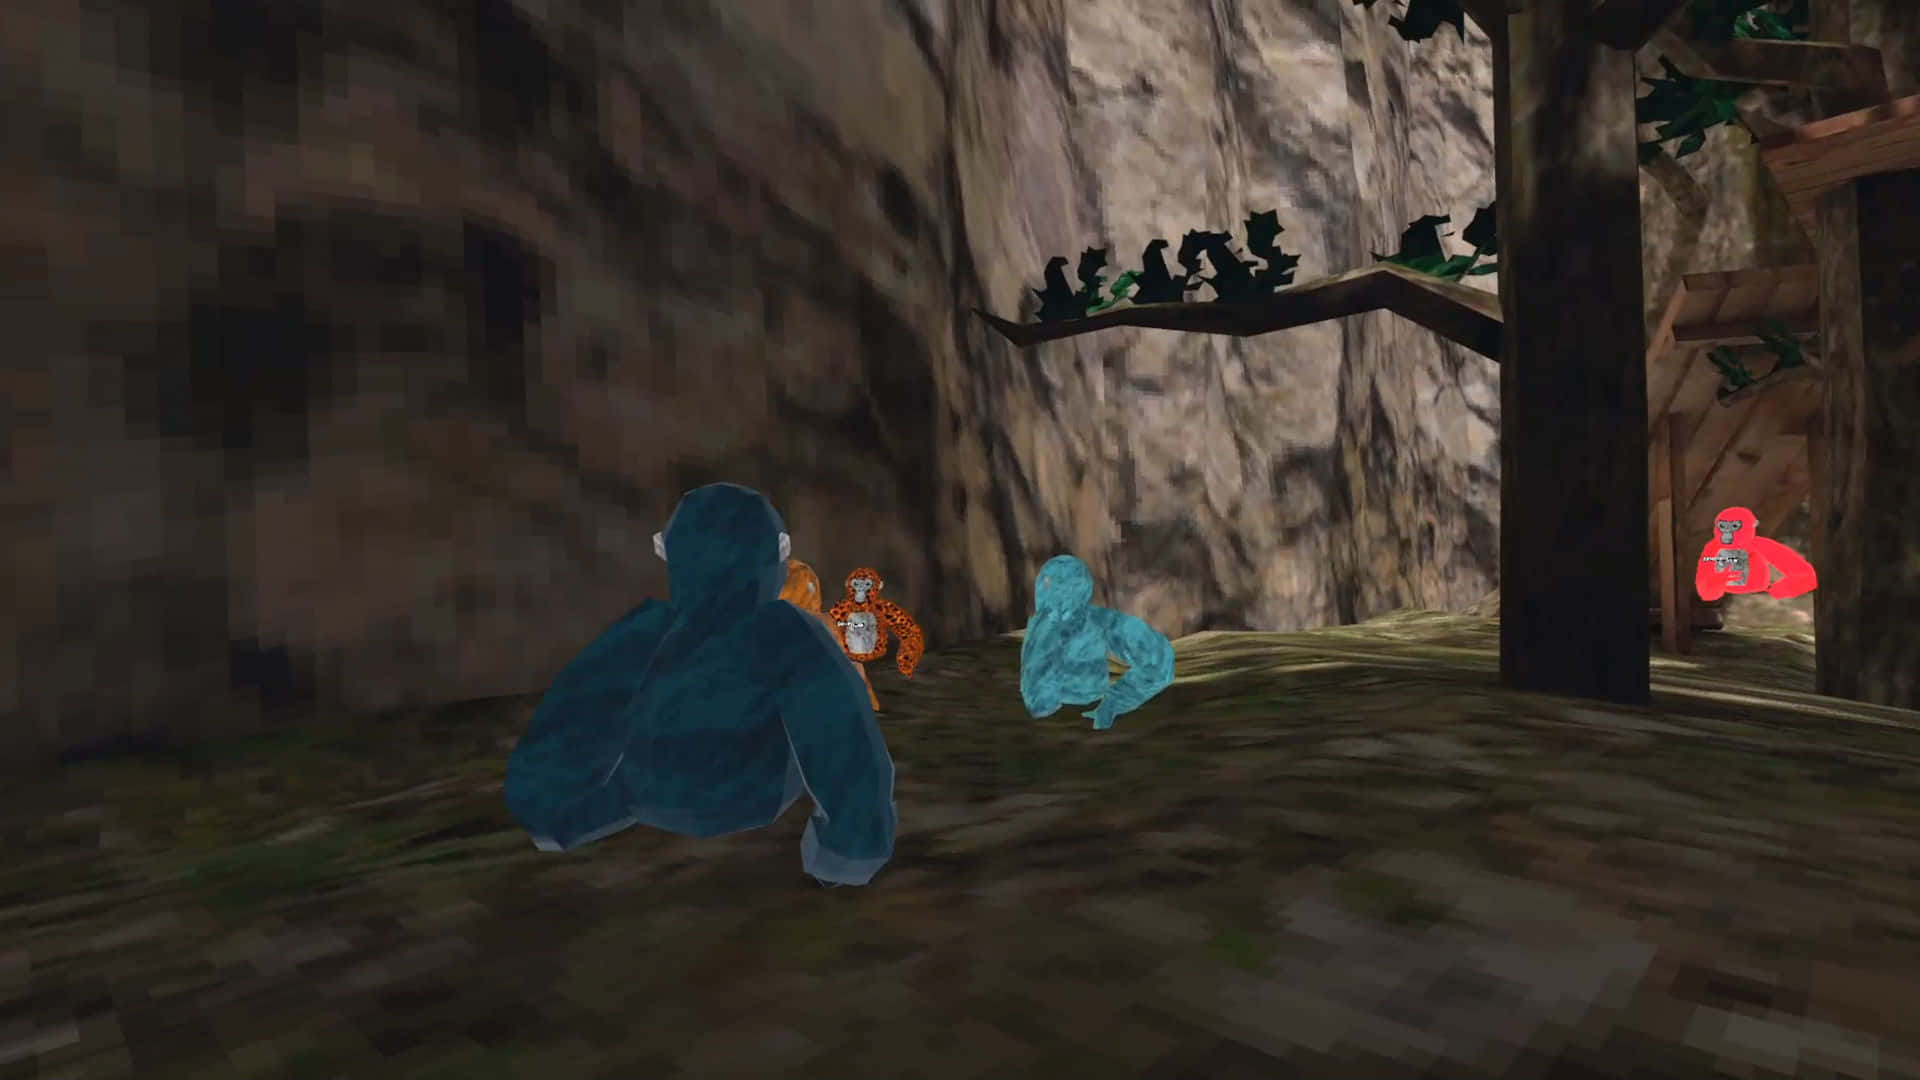 A Video Game Showing A Group Of People In A Forest